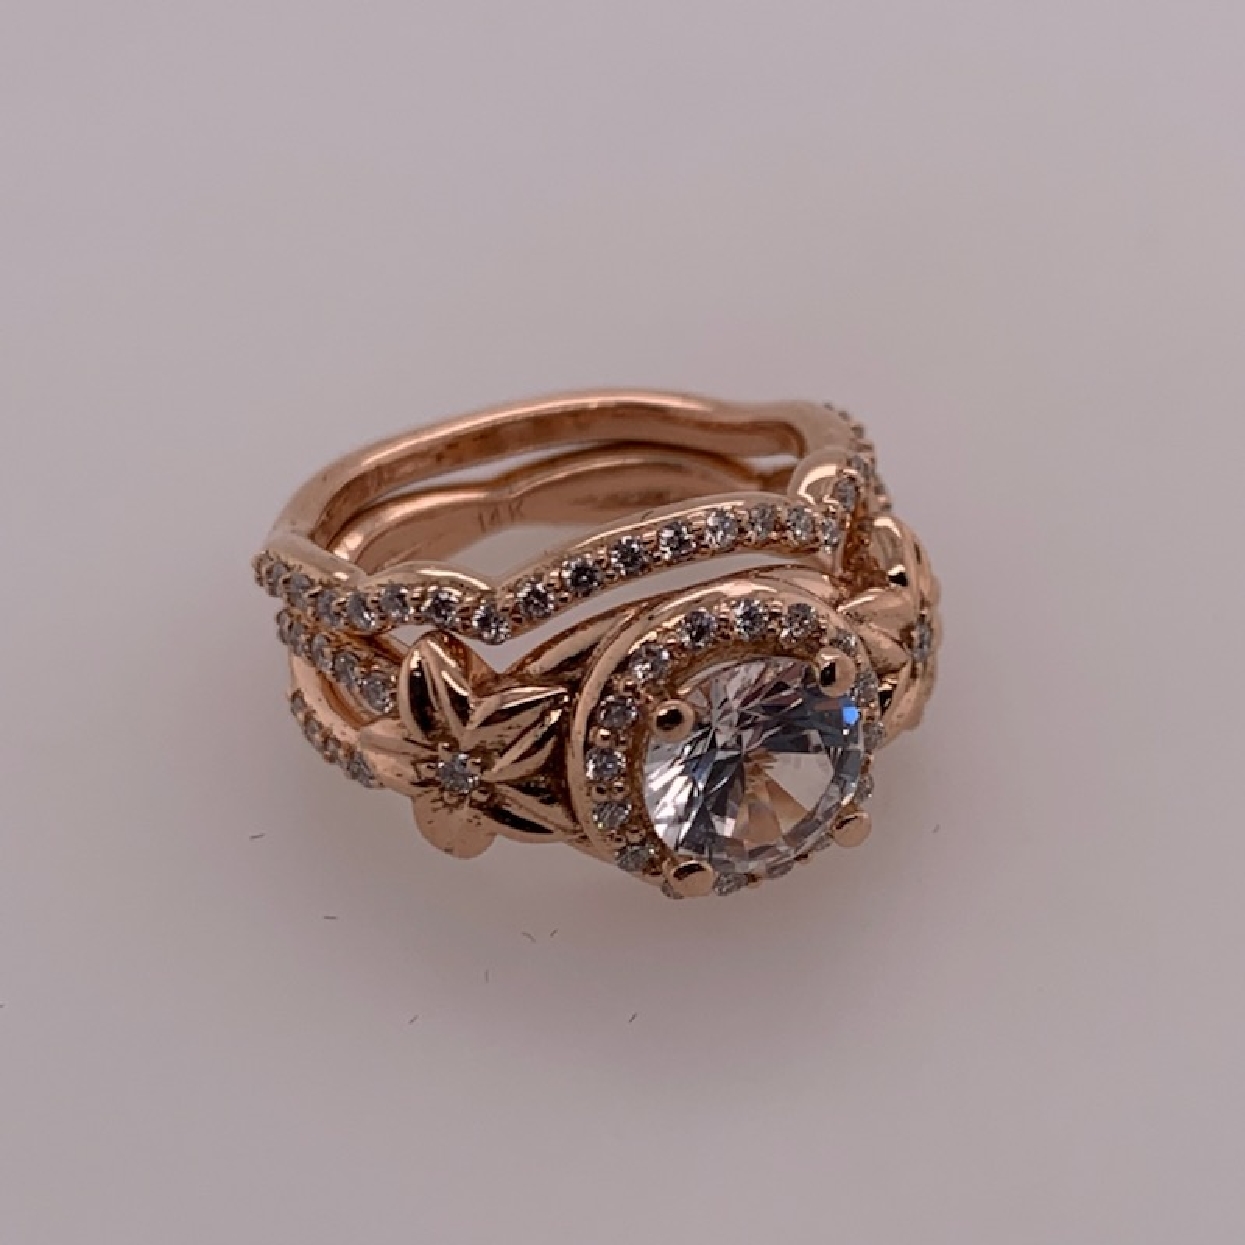 14K Rose Gold Wedding Set with White Sapphire Center and Diamond Accents; Size 6